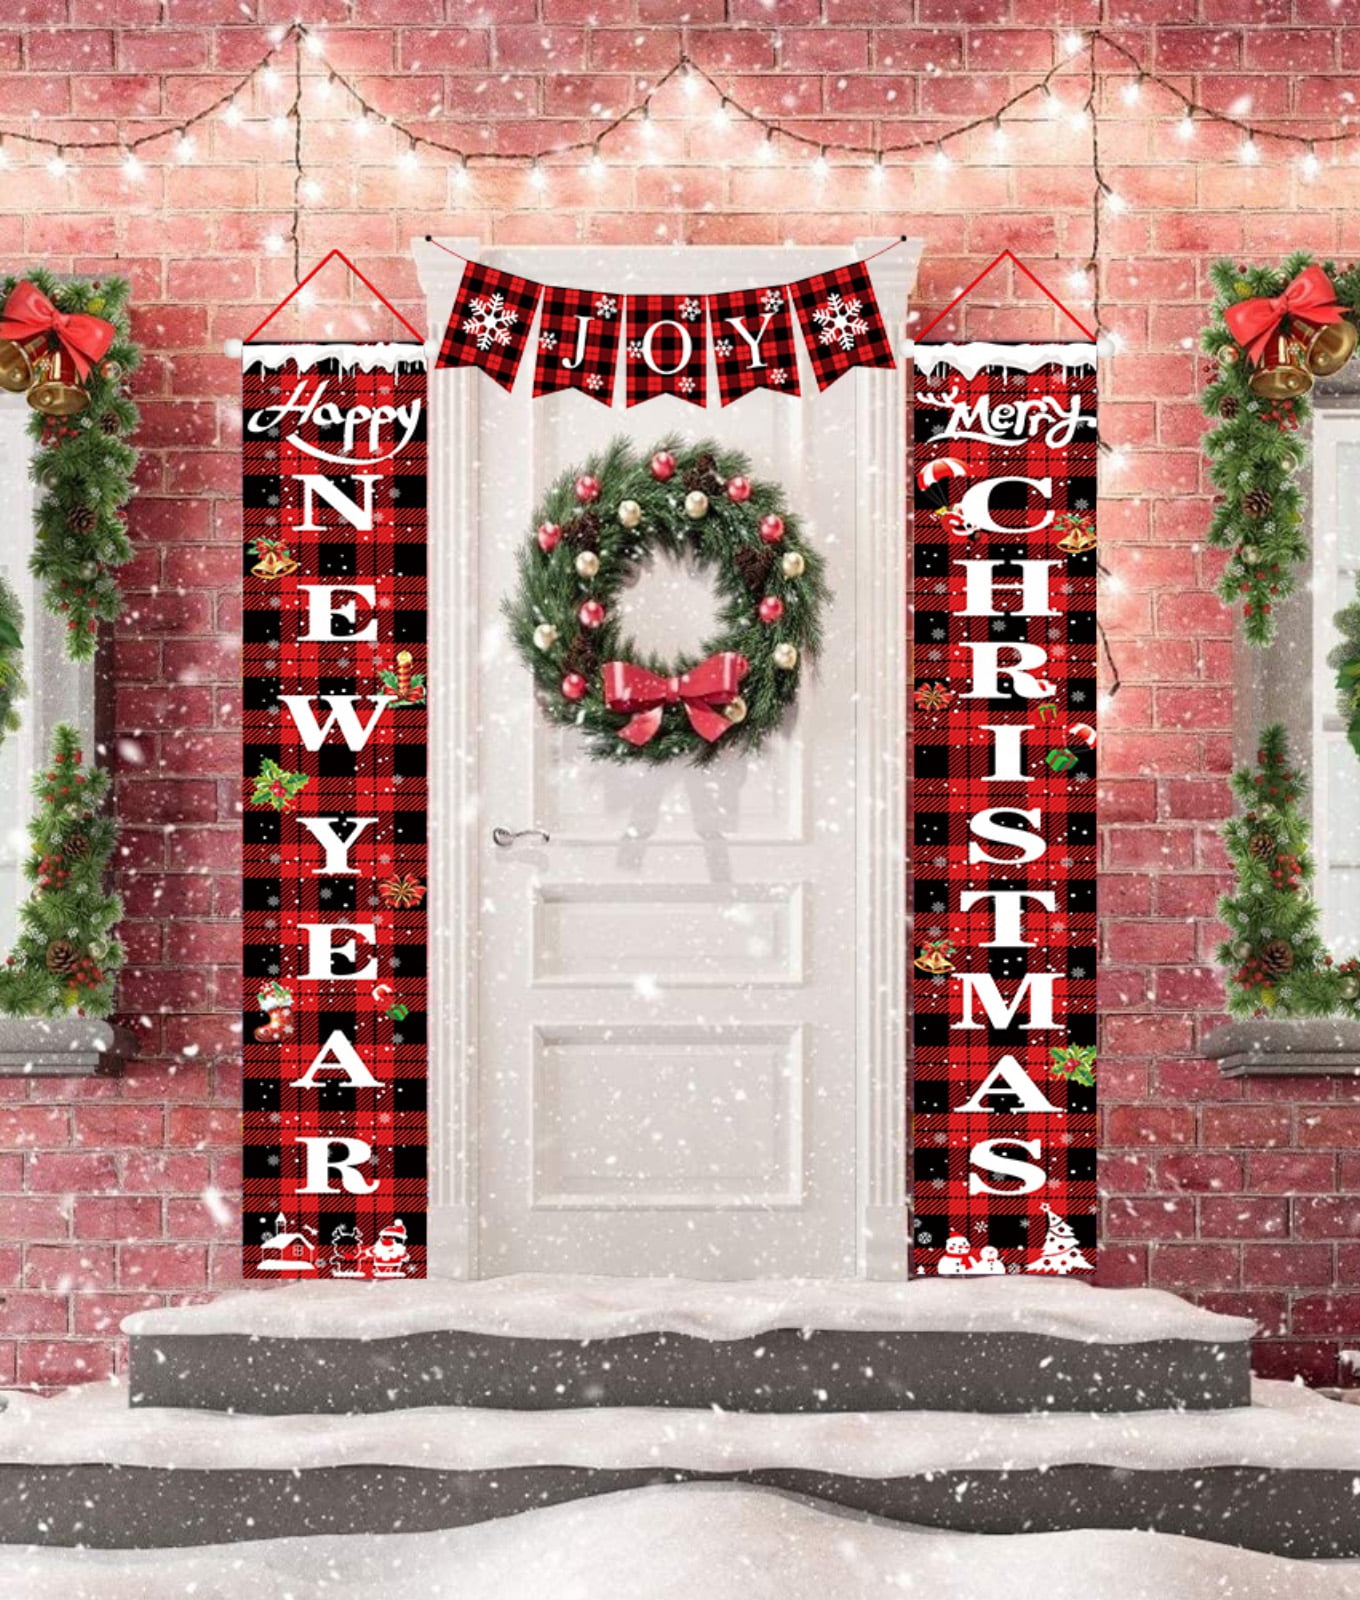 Buffalo Plaid Golden Porch signs for Christmas Decor DAZONGE Outdoor Christmas Decorations Porch Banners Happy New Year & Merry Christmas Front door